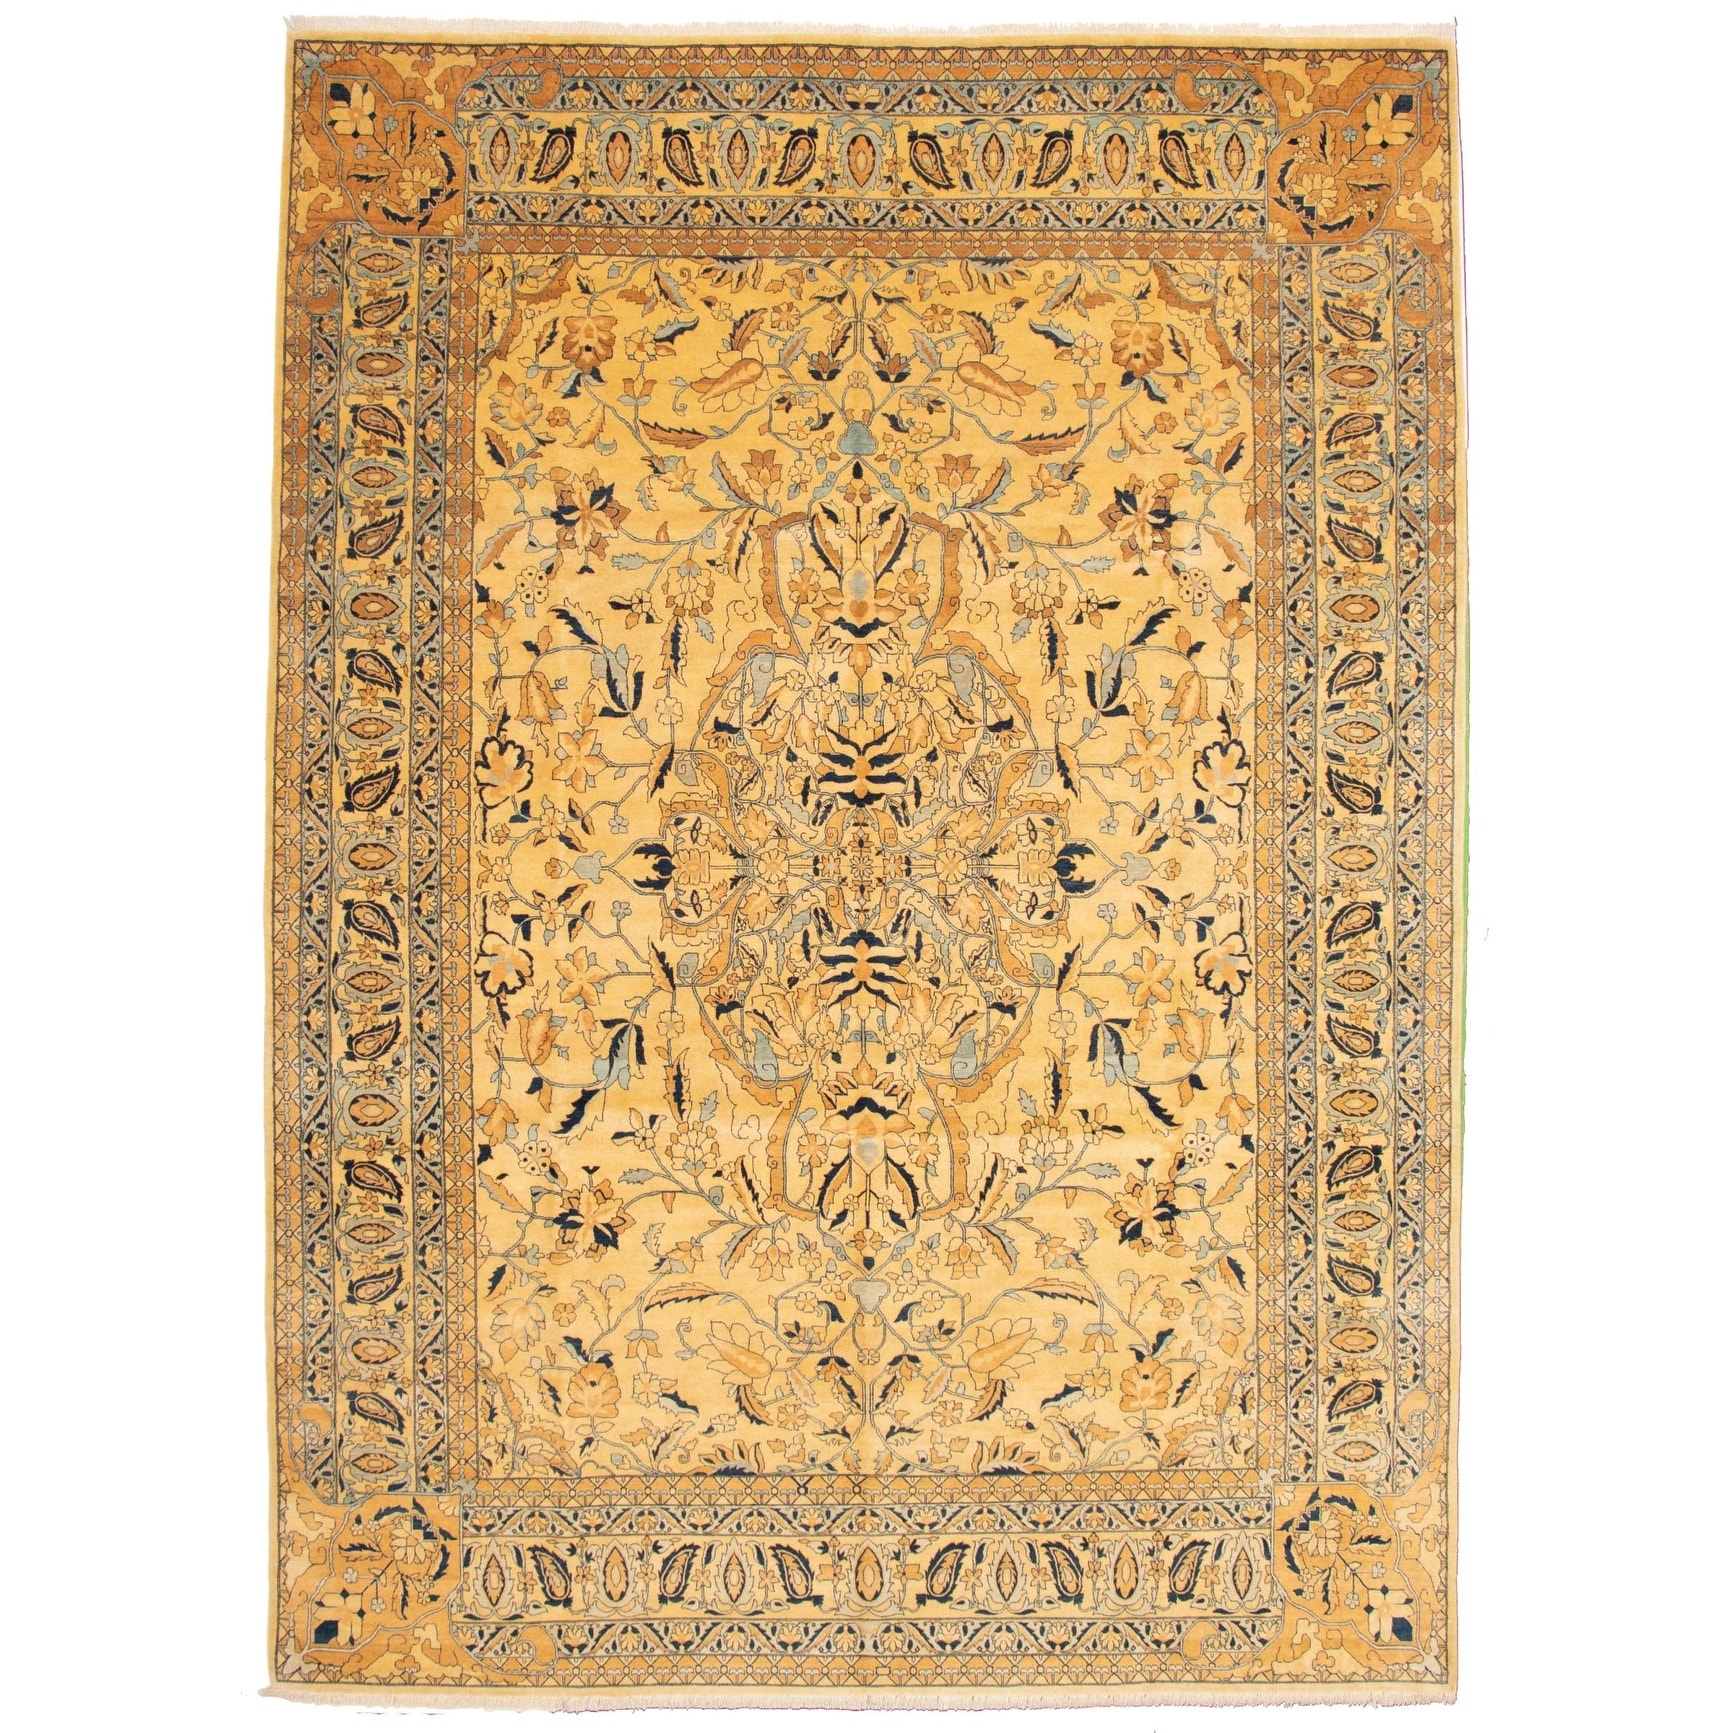 345467 Hand-Knotted Heritage Casual Grey Rug 8'0 x 10'1 eCarpet Gallery Large Area Rug for Living Room Bedroom